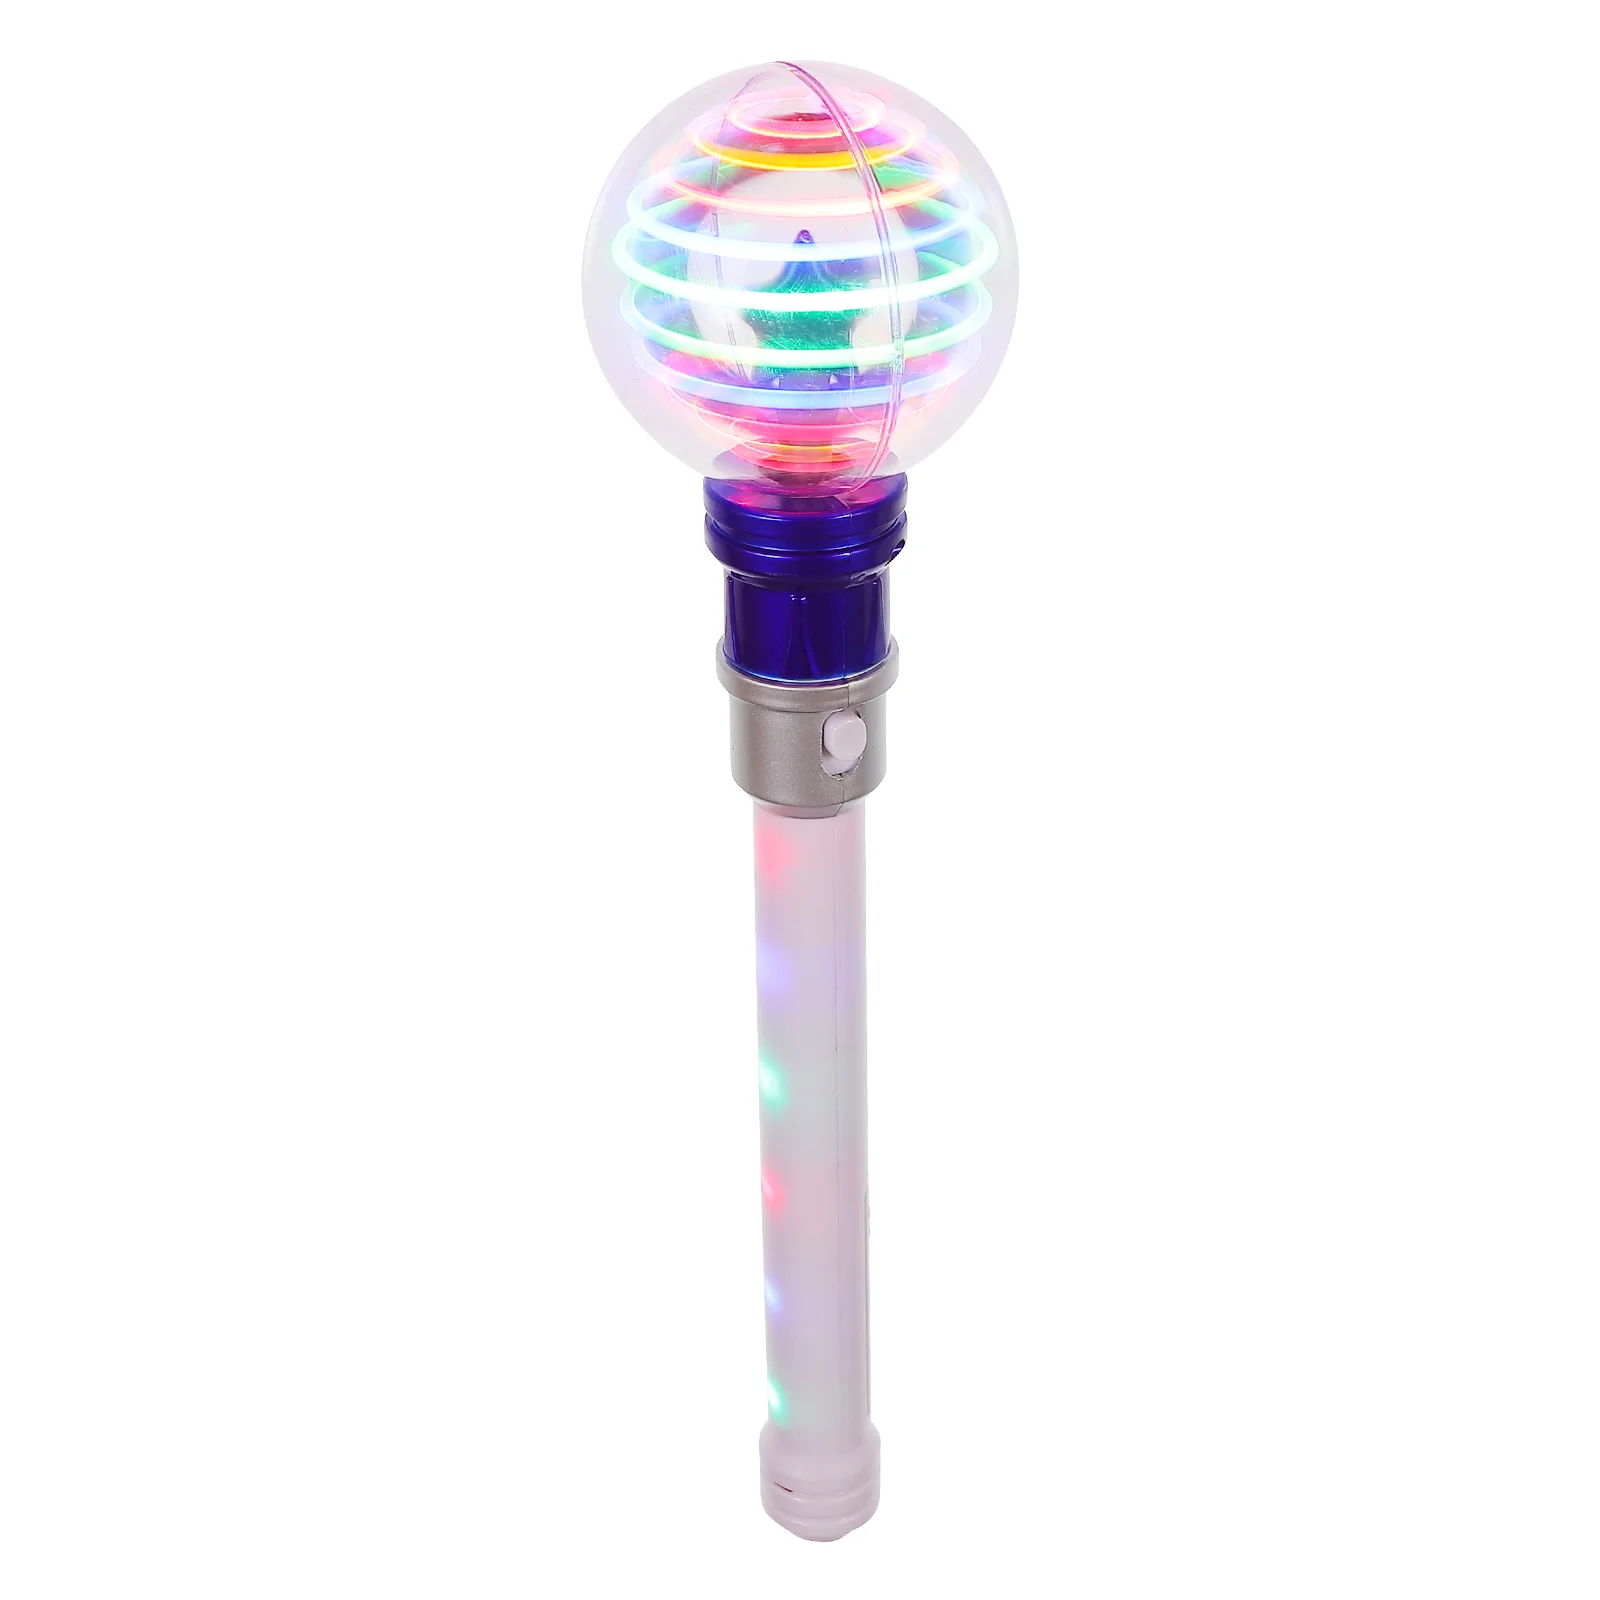 

Wand Light Flashing Led Up Sticks Spinning Glow Ball Party Fairy Rotating Night Colorful Glowing Halloween Dark The Girl Props